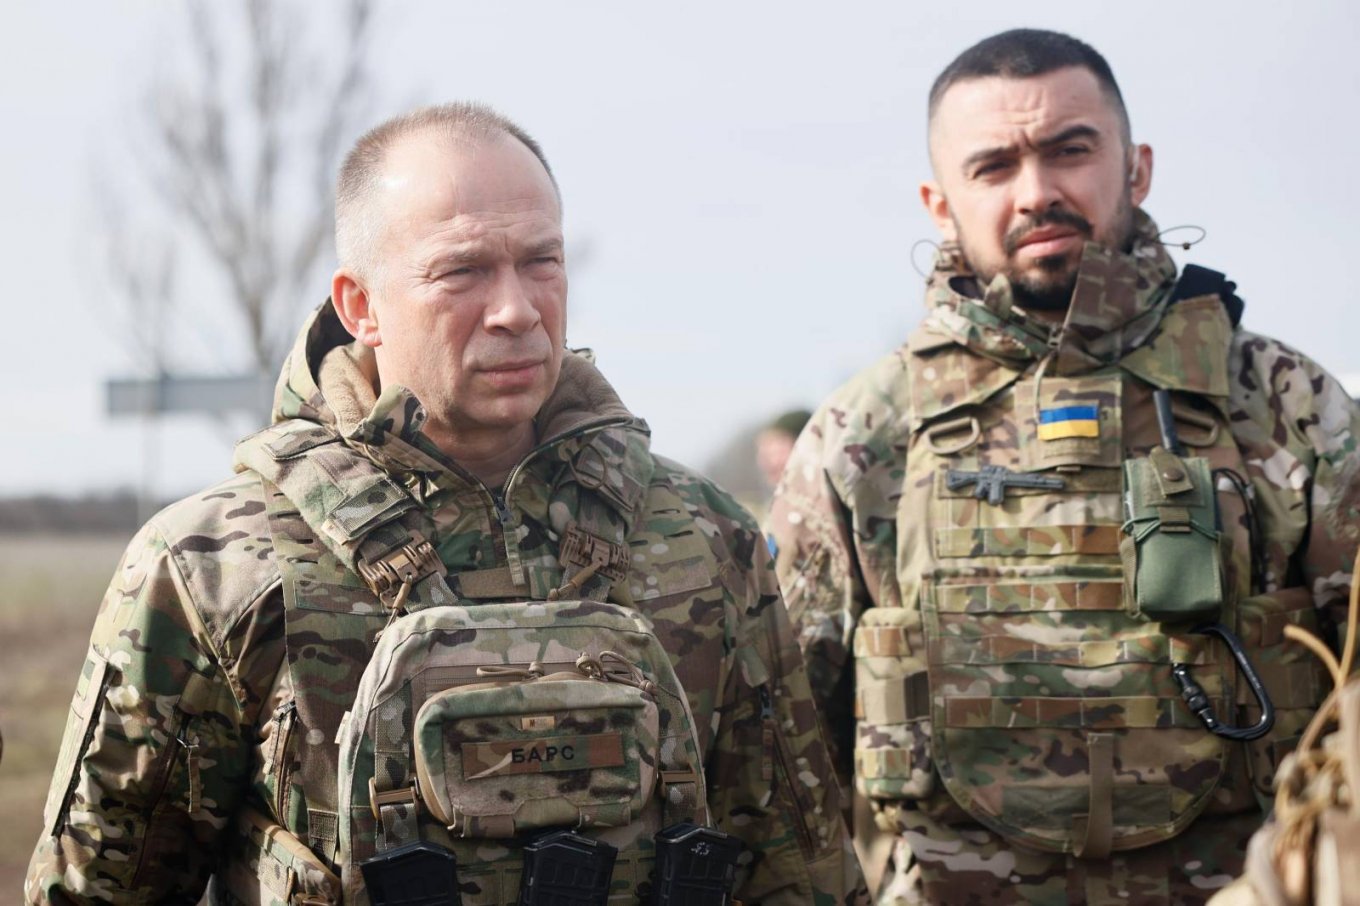 CinC of Ukraine’s Armed Forces General Syrskii Visits Frontline, Comments Situation on Battlefield, Defense Express